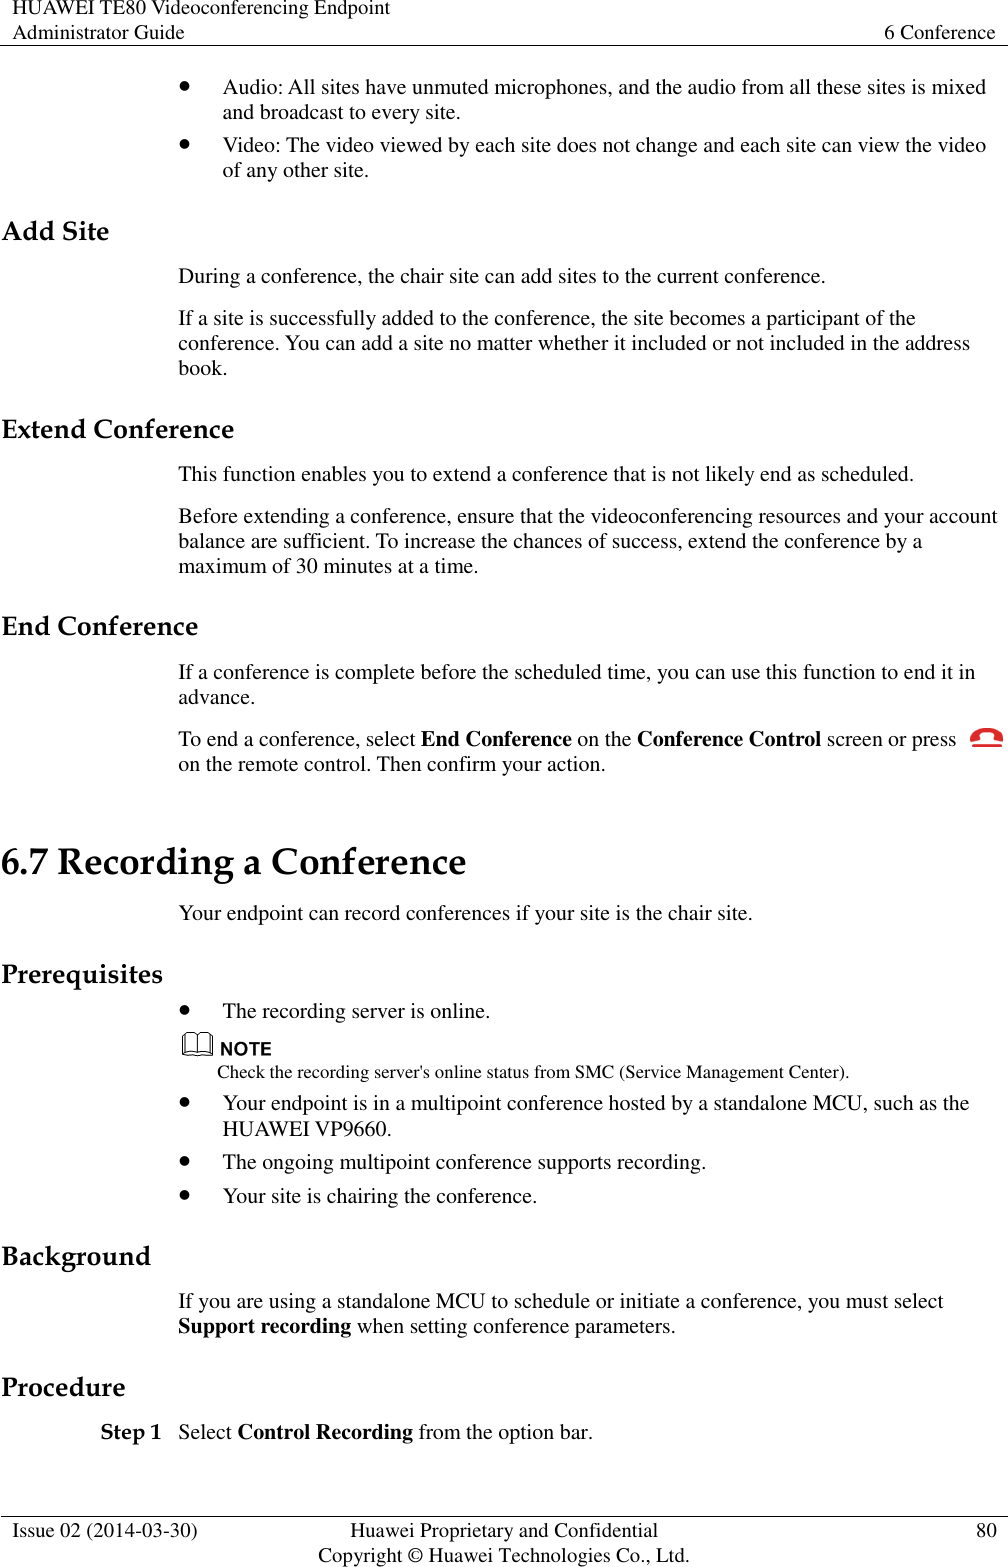 HUAWEI TE80 Videoconferencing Endpoint Administrator Guide 6 Conference  Issue 02 (2014-03-30) Huawei Proprietary and Confidential Copyright © Huawei Technologies Co., Ltd. 80   Audio: All sites have unmuted microphones, and the audio from all these sites is mixed and broadcast to every site.  Video: The video viewed by each site does not change and each site can view the video of any other site.   Add Site During a conference, the chair site can add sites to the current conference. If a site is successfully added to the conference, the site becomes a participant of the conference. You can add a site no matter whether it included or not included in the address book. Extend Conference This function enables you to extend a conference that is not likely end as scheduled. Before extending a conference, ensure that the videoconferencing resources and your account balance are sufficient. To increase the chances of success, extend the conference by a maximum of 30 minutes at a time. End Conference If a conference is complete before the scheduled time, you can use this function to end it in advance. To end a conference, select End Conference on the Conference Control screen or press   on the remote control. Then confirm your action. 6.7 Recording a Conference Your endpoint can record conferences if your site is the chair site. Prerequisites  The recording server is online.  Check the recording server&apos;s online status from SMC (Service Management Center).  Your endpoint is in a multipoint conference hosted by a standalone MCU, such as the HUAWEI VP9660.  The ongoing multipoint conference supports recording.  Your site is chairing the conference. Background If you are using a standalone MCU to schedule or initiate a conference, you must select Support recording when setting conference parameters.   Procedure Step 1 Select Control Recording from the option bar. 